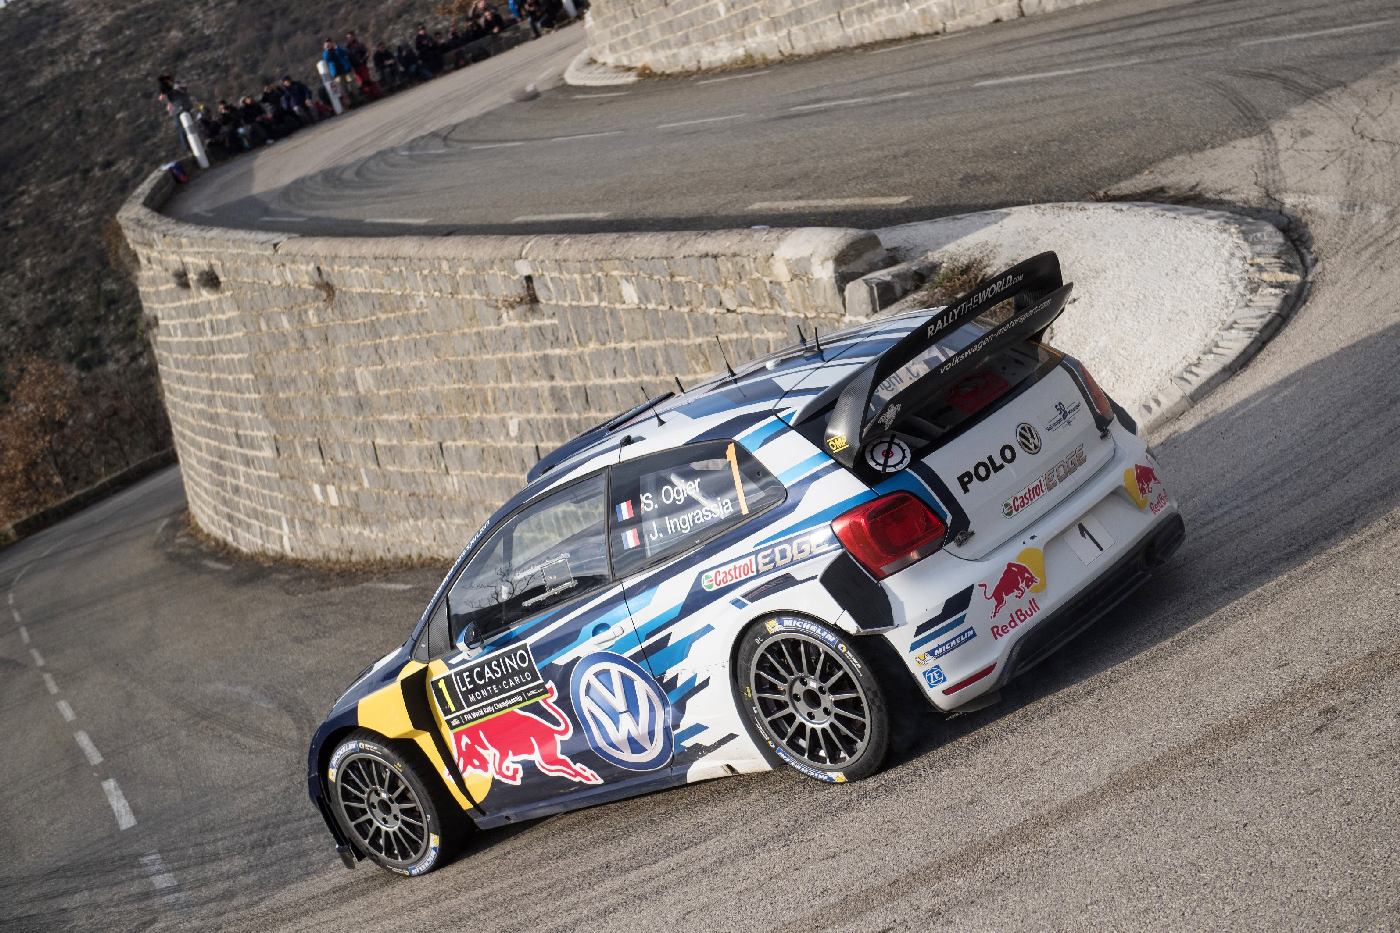 Sebastien Ogier (FRA) competes during the FIA World Rally Championship 2016 in Monte Carlo, Monaco on January 24, 2016